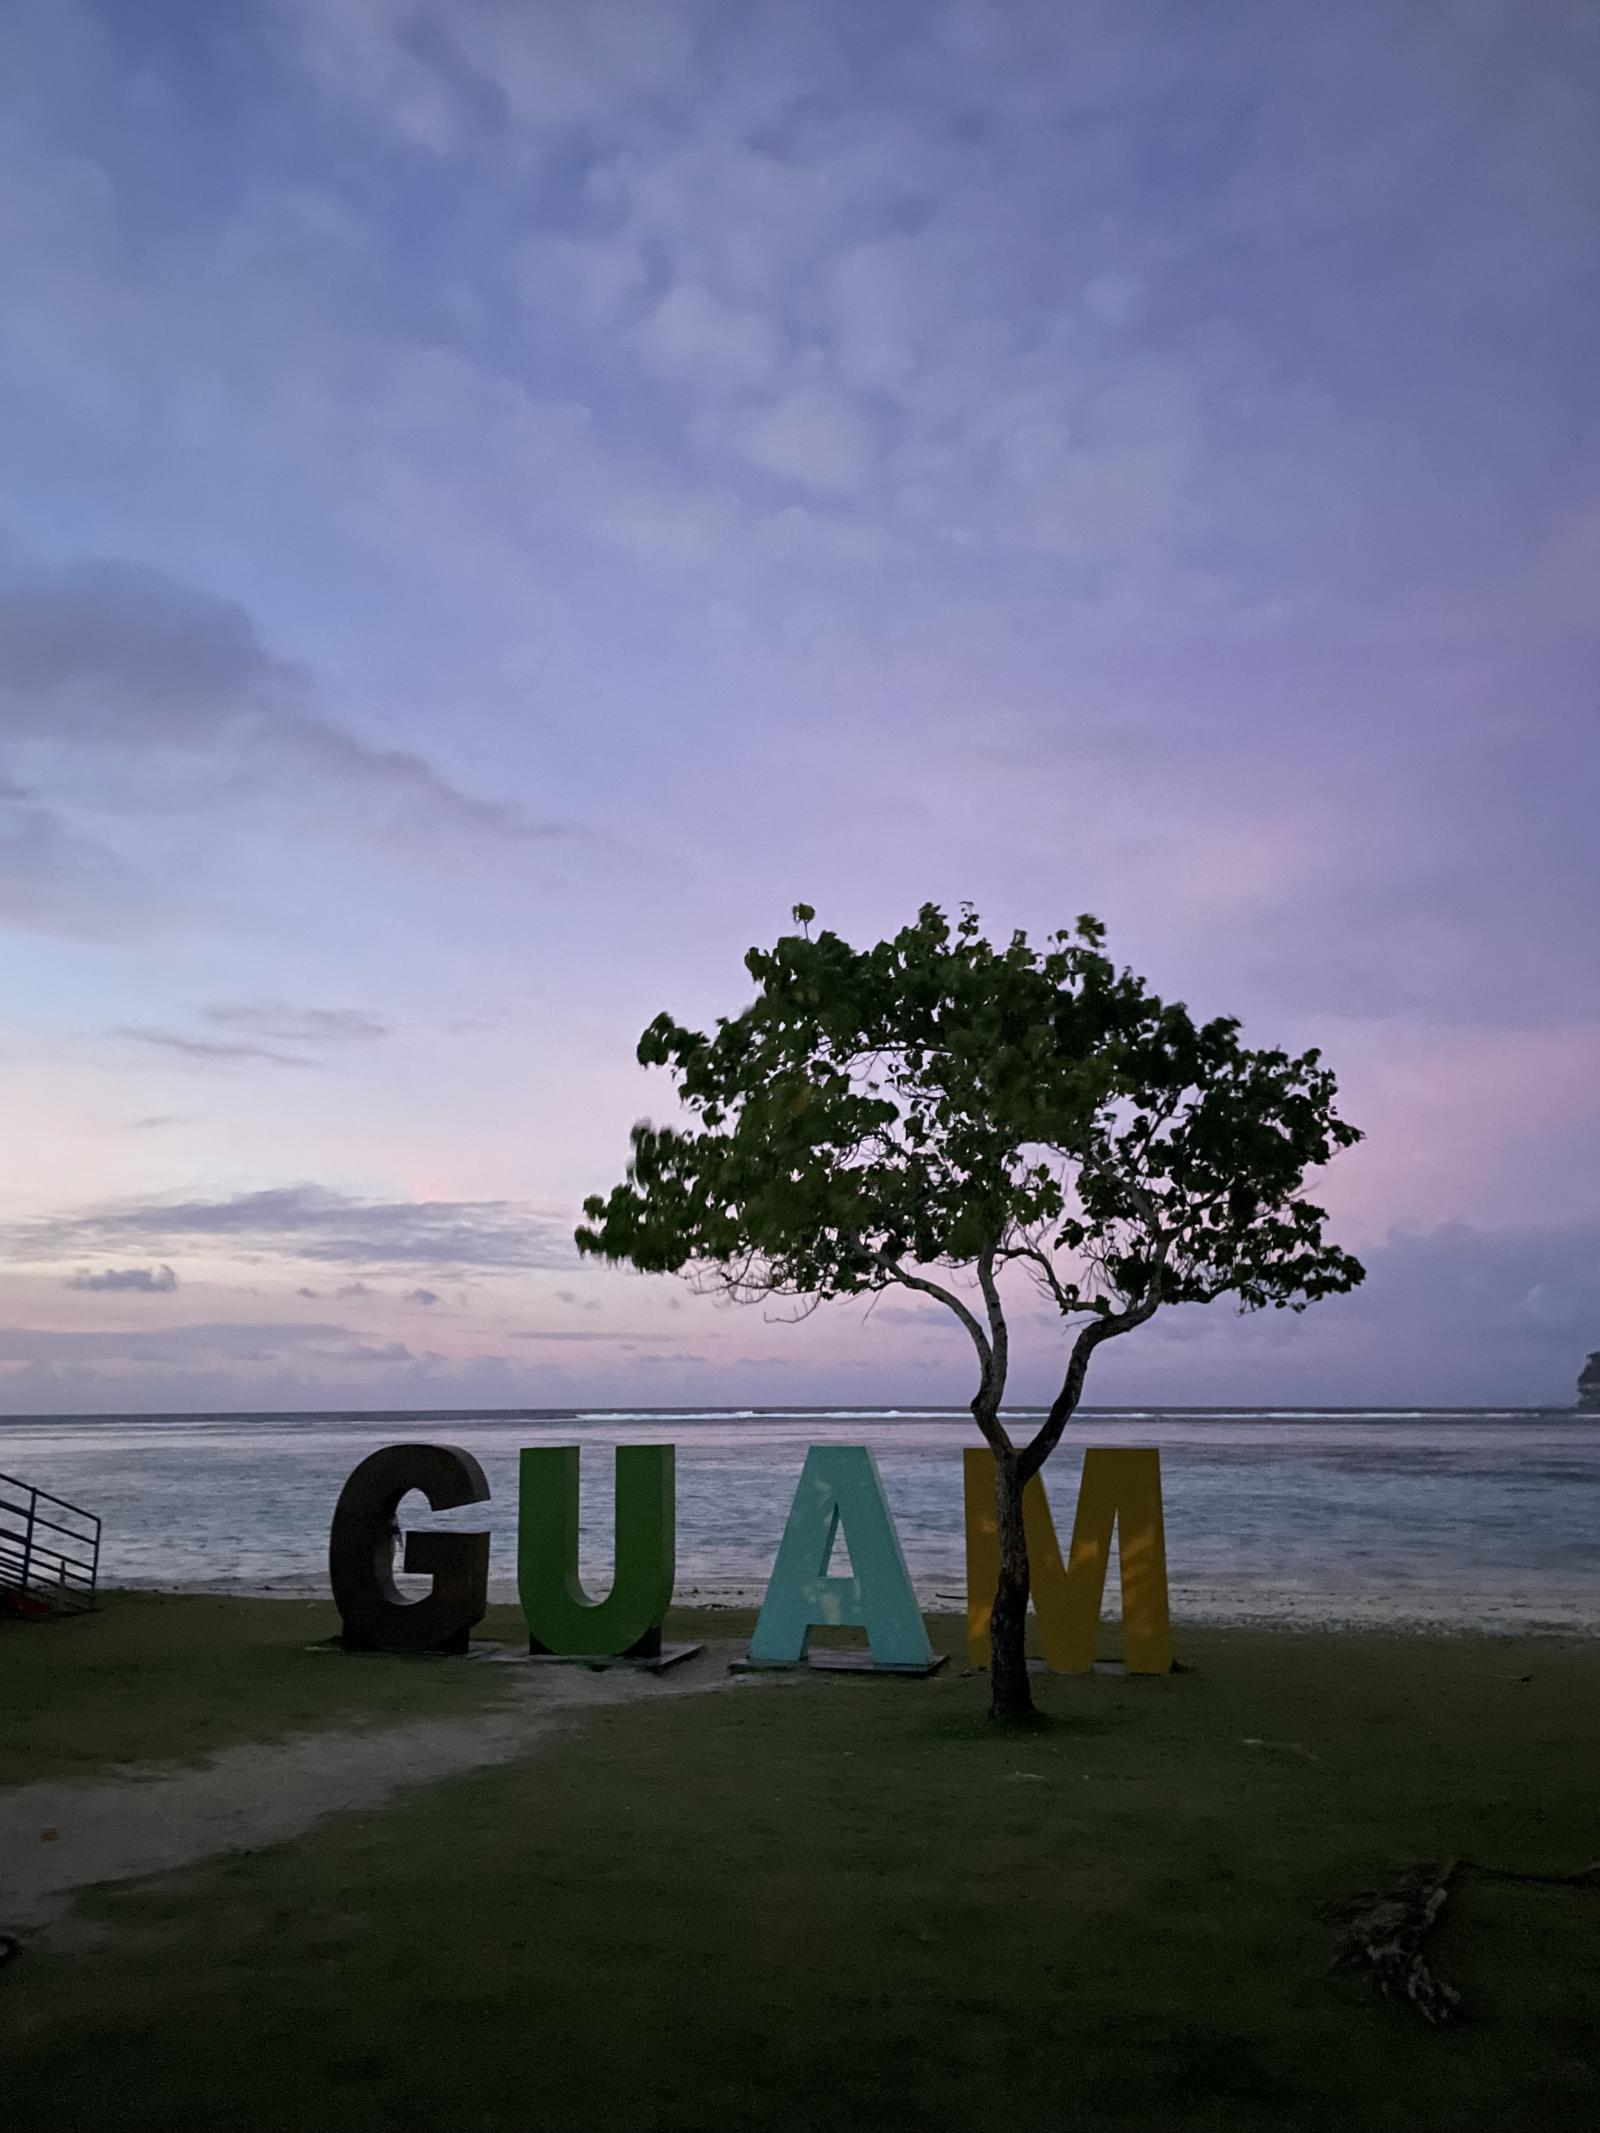 I was looking for a big car for 6 people, so I used Nissan Rent-A-Car in Guam! The 6-seater Quest was enough to put 5 suitcases in, and the seats were comfortable and the size was wide, so I was very satisfied with the trip. I was impressed that I could pick up right from the airport and the male staff at the desk were really kind! I have also been using the pocket wifi that is rented for events! I plan to use it again on my next trip to Guam :)